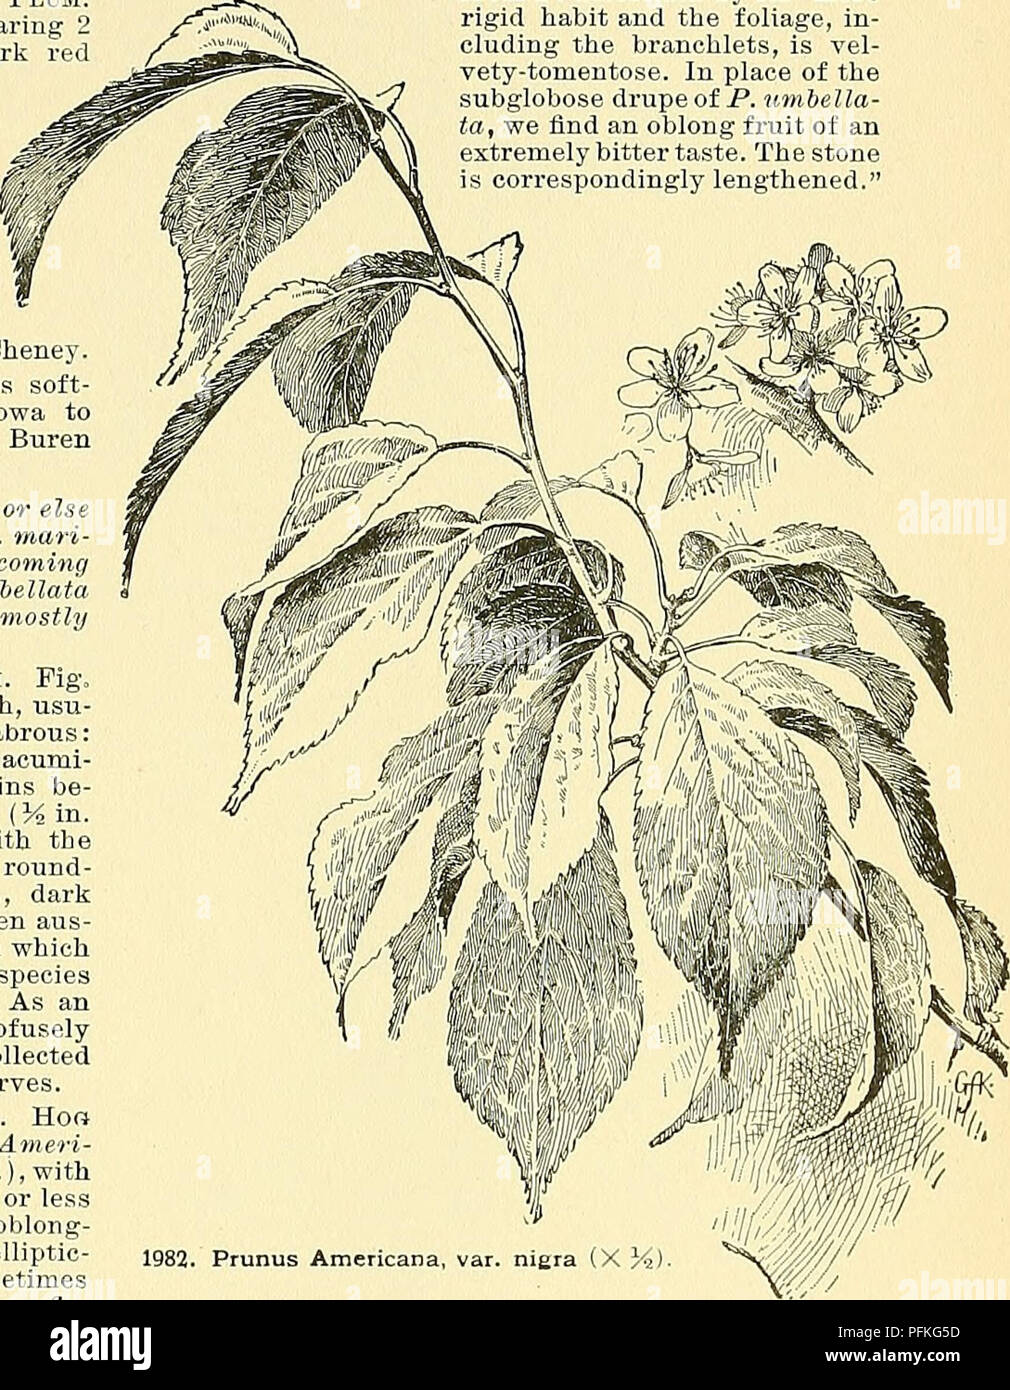 . Cyclopedia of American horticulture, comprising suggestions for cultivation of horticultural plants, descriptions of the species of fruits, vegetables, flowers, and ornamental plants sold in the United States and Canada, together with geographical and biographical sketches. Gardening. shape. The foliage suggests P. cerasifera. A species recently described, P. injucunda. Small, from Stone Mountain, Ga., and not in the trade, is distinguished from P. umbellata by its &quot;more rigid habit and the foliage, in- cluding the branohlets, is vel- vety-tomentose. In place of the subglobose drupe of  Stock Photo